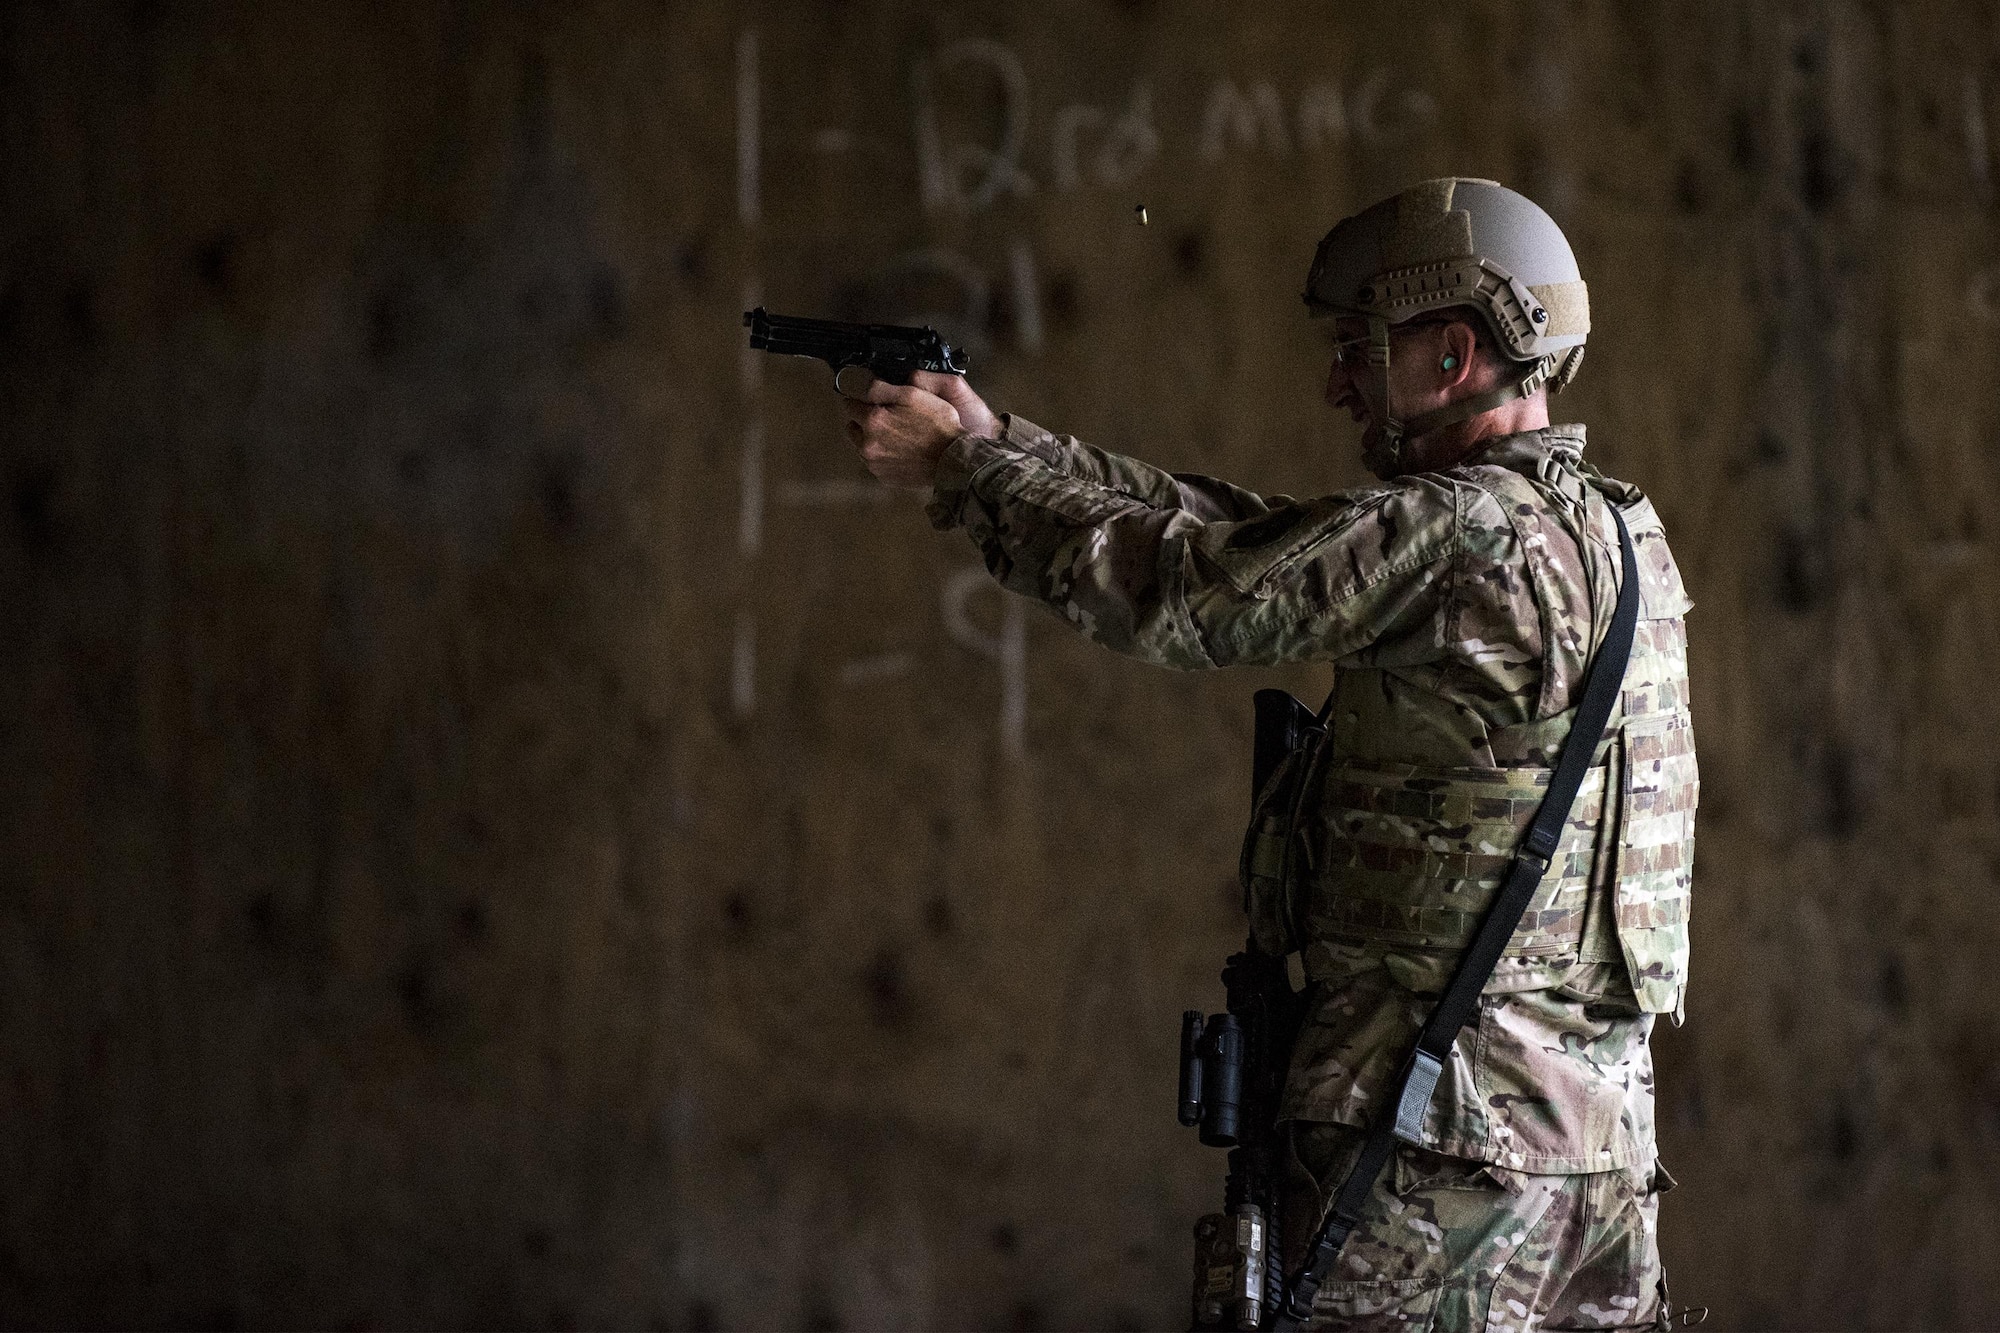 U.S. Air Force Maj. Gen. Scott Zobrist, 9th Air Force commander, fires an M9 pistol, Oct. 6, 2016, at Moody Air Force Base, Ga. As the 9th Air Force commander, Zobrist is responsible for ensuring combat support capabilities from eight wings and three direct reporting units, consisting of more than 400 aircraft and 29,000 active-duty Airmen and civilians. This was Zobrist’s first official visit to the 93rd Air Ground Operations Wing since taking command in May 2016. He was accompanied by Chief Master Sgt. Frank H. Batten III, 9th Air Force command chief. (U.S. Air Force photo by Airman 1st Class Daniel Snider)